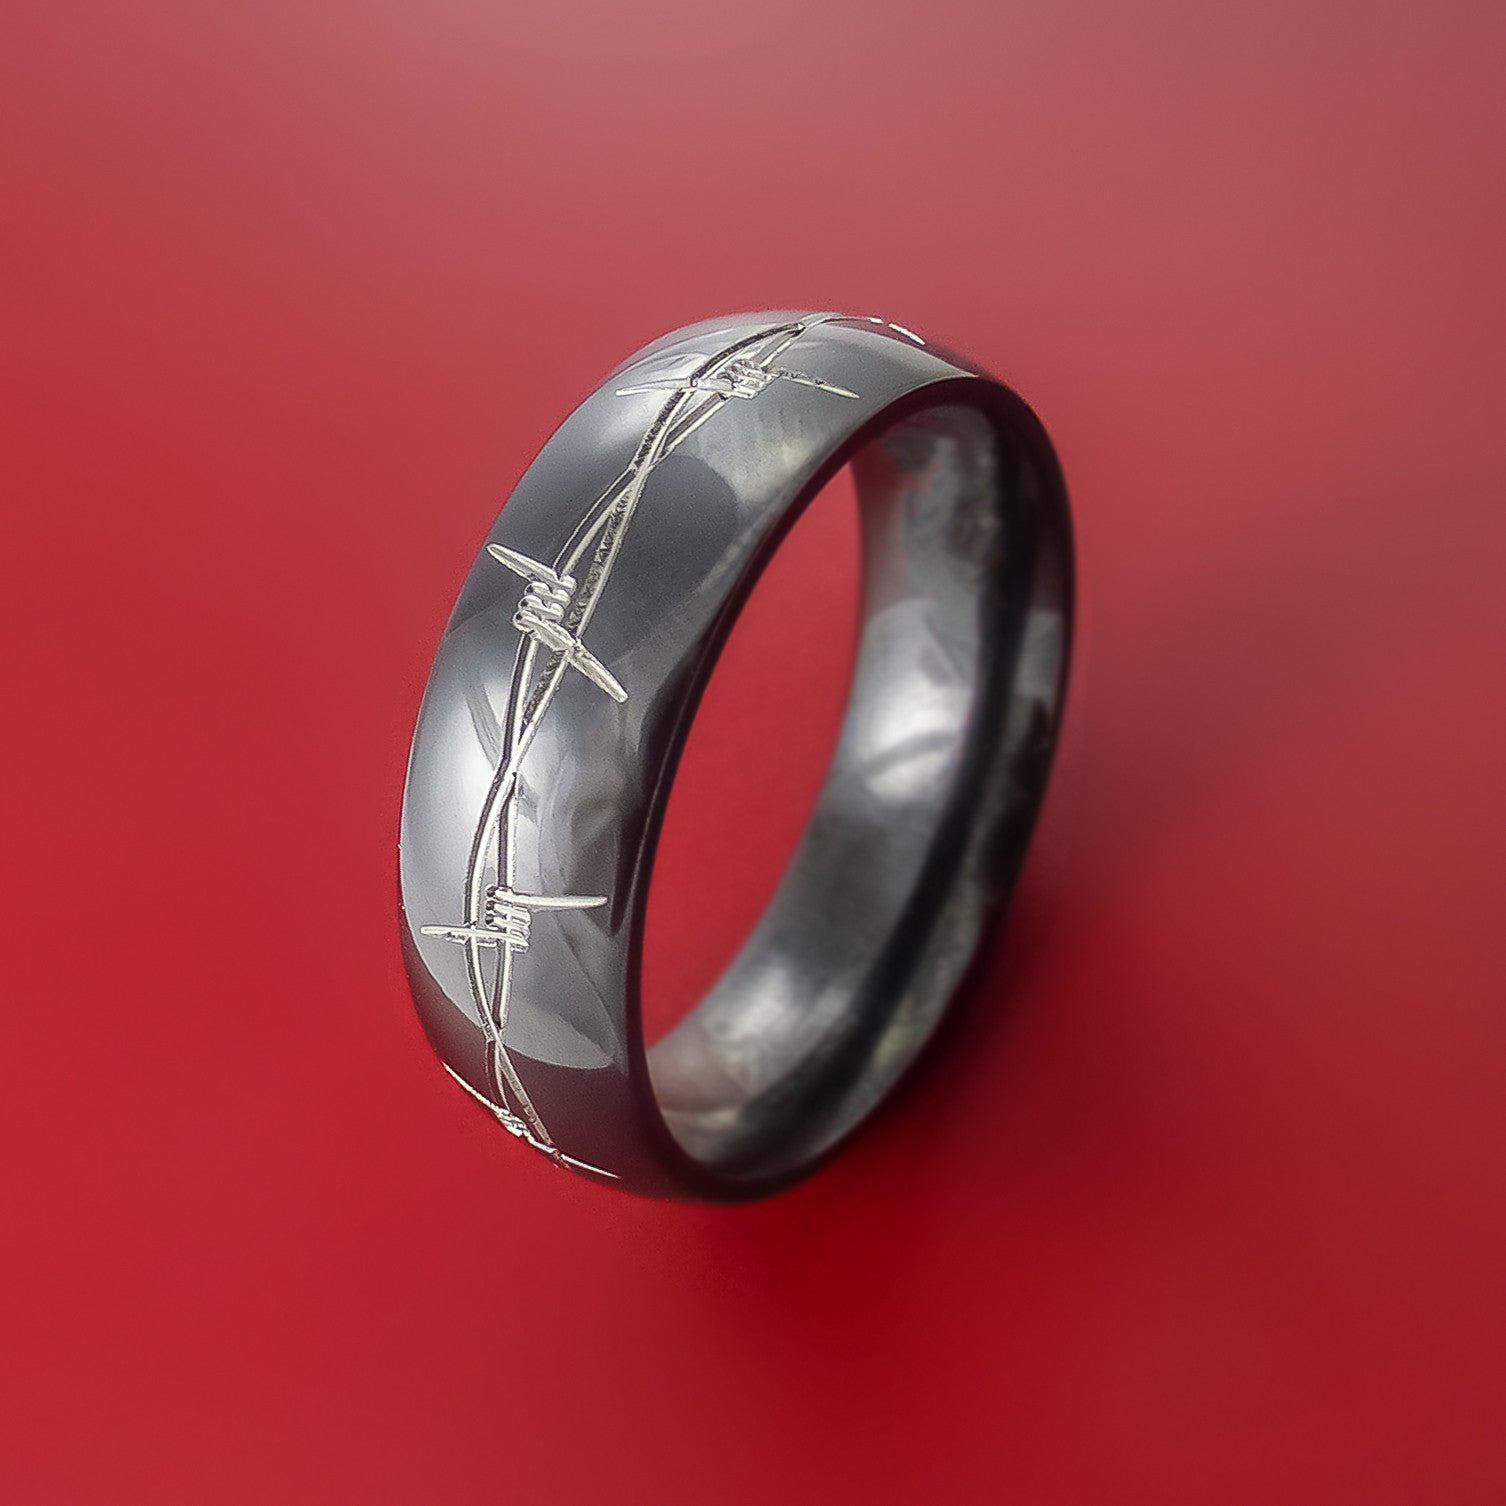 Black Zirconium Ring with Barb Wire Laser-Etched Design Inlay Custom Made  Men's Wedding Band